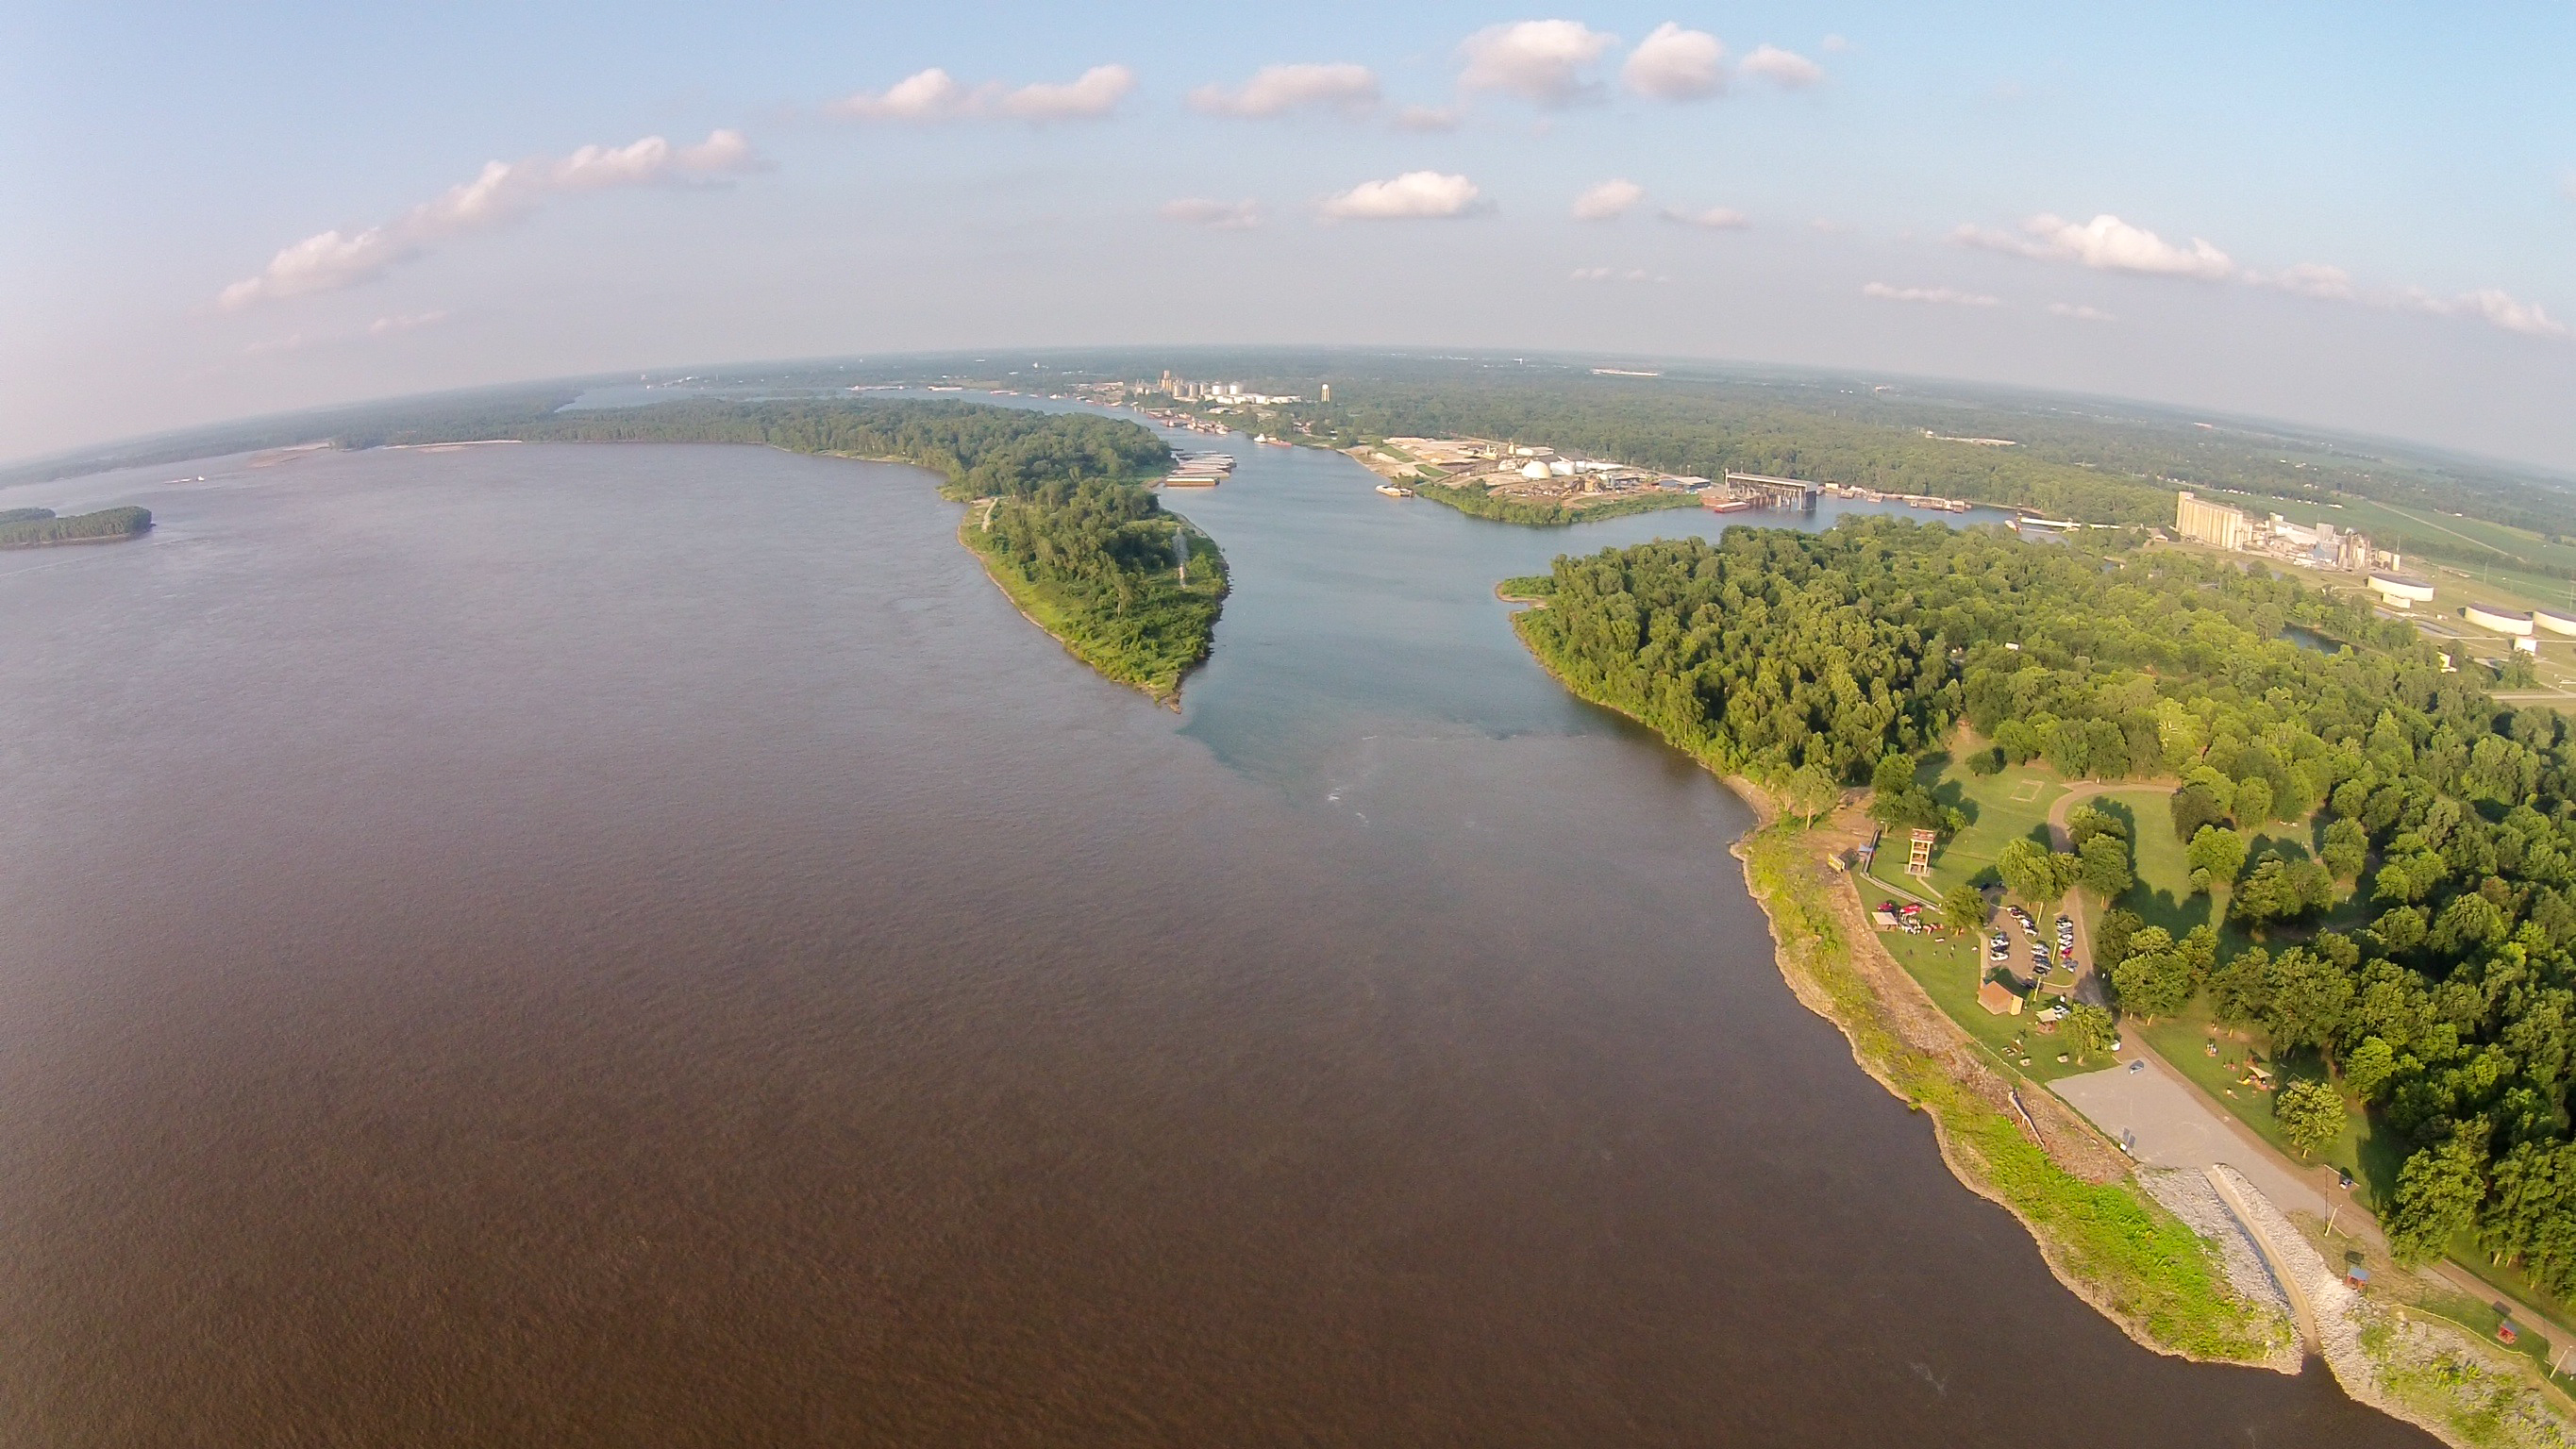 Entrance to Port of Greenville from the Mississippi River